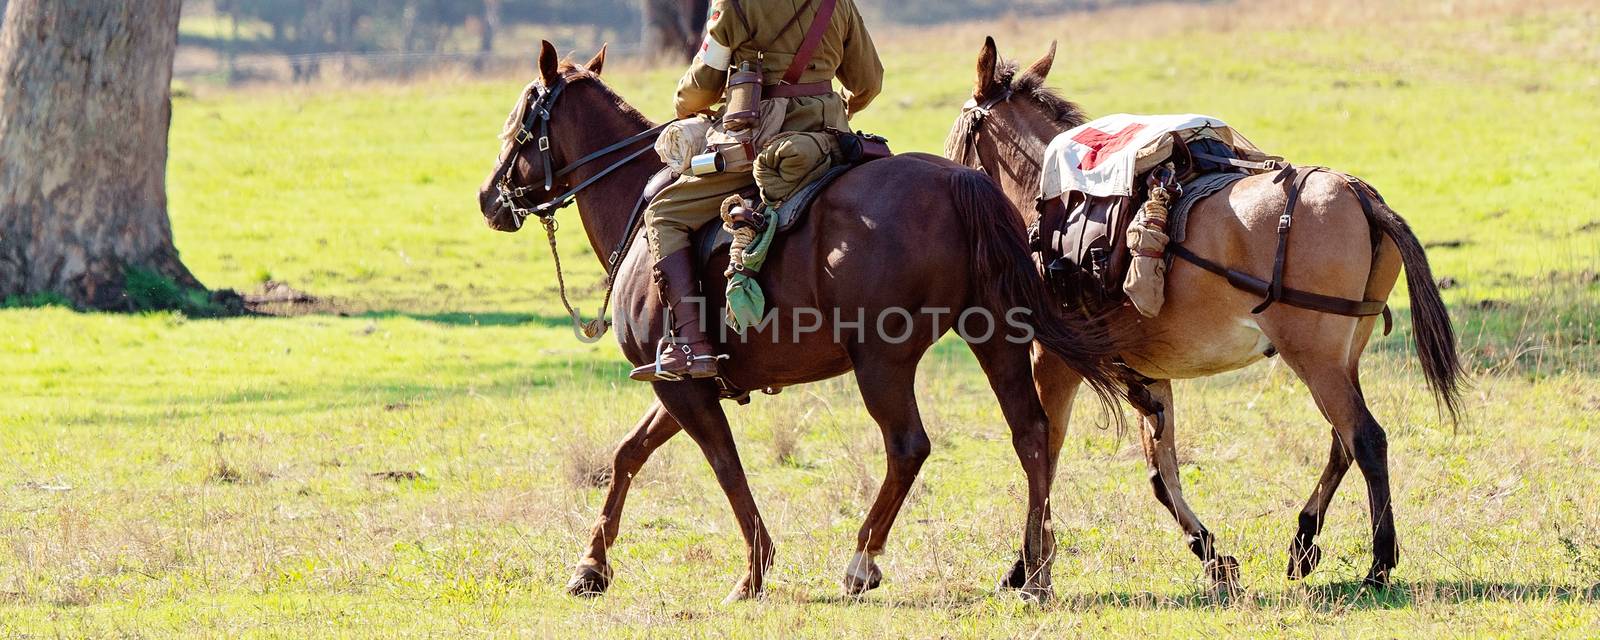 A first aid donkey being led by a rider of the Australian light horse brigade